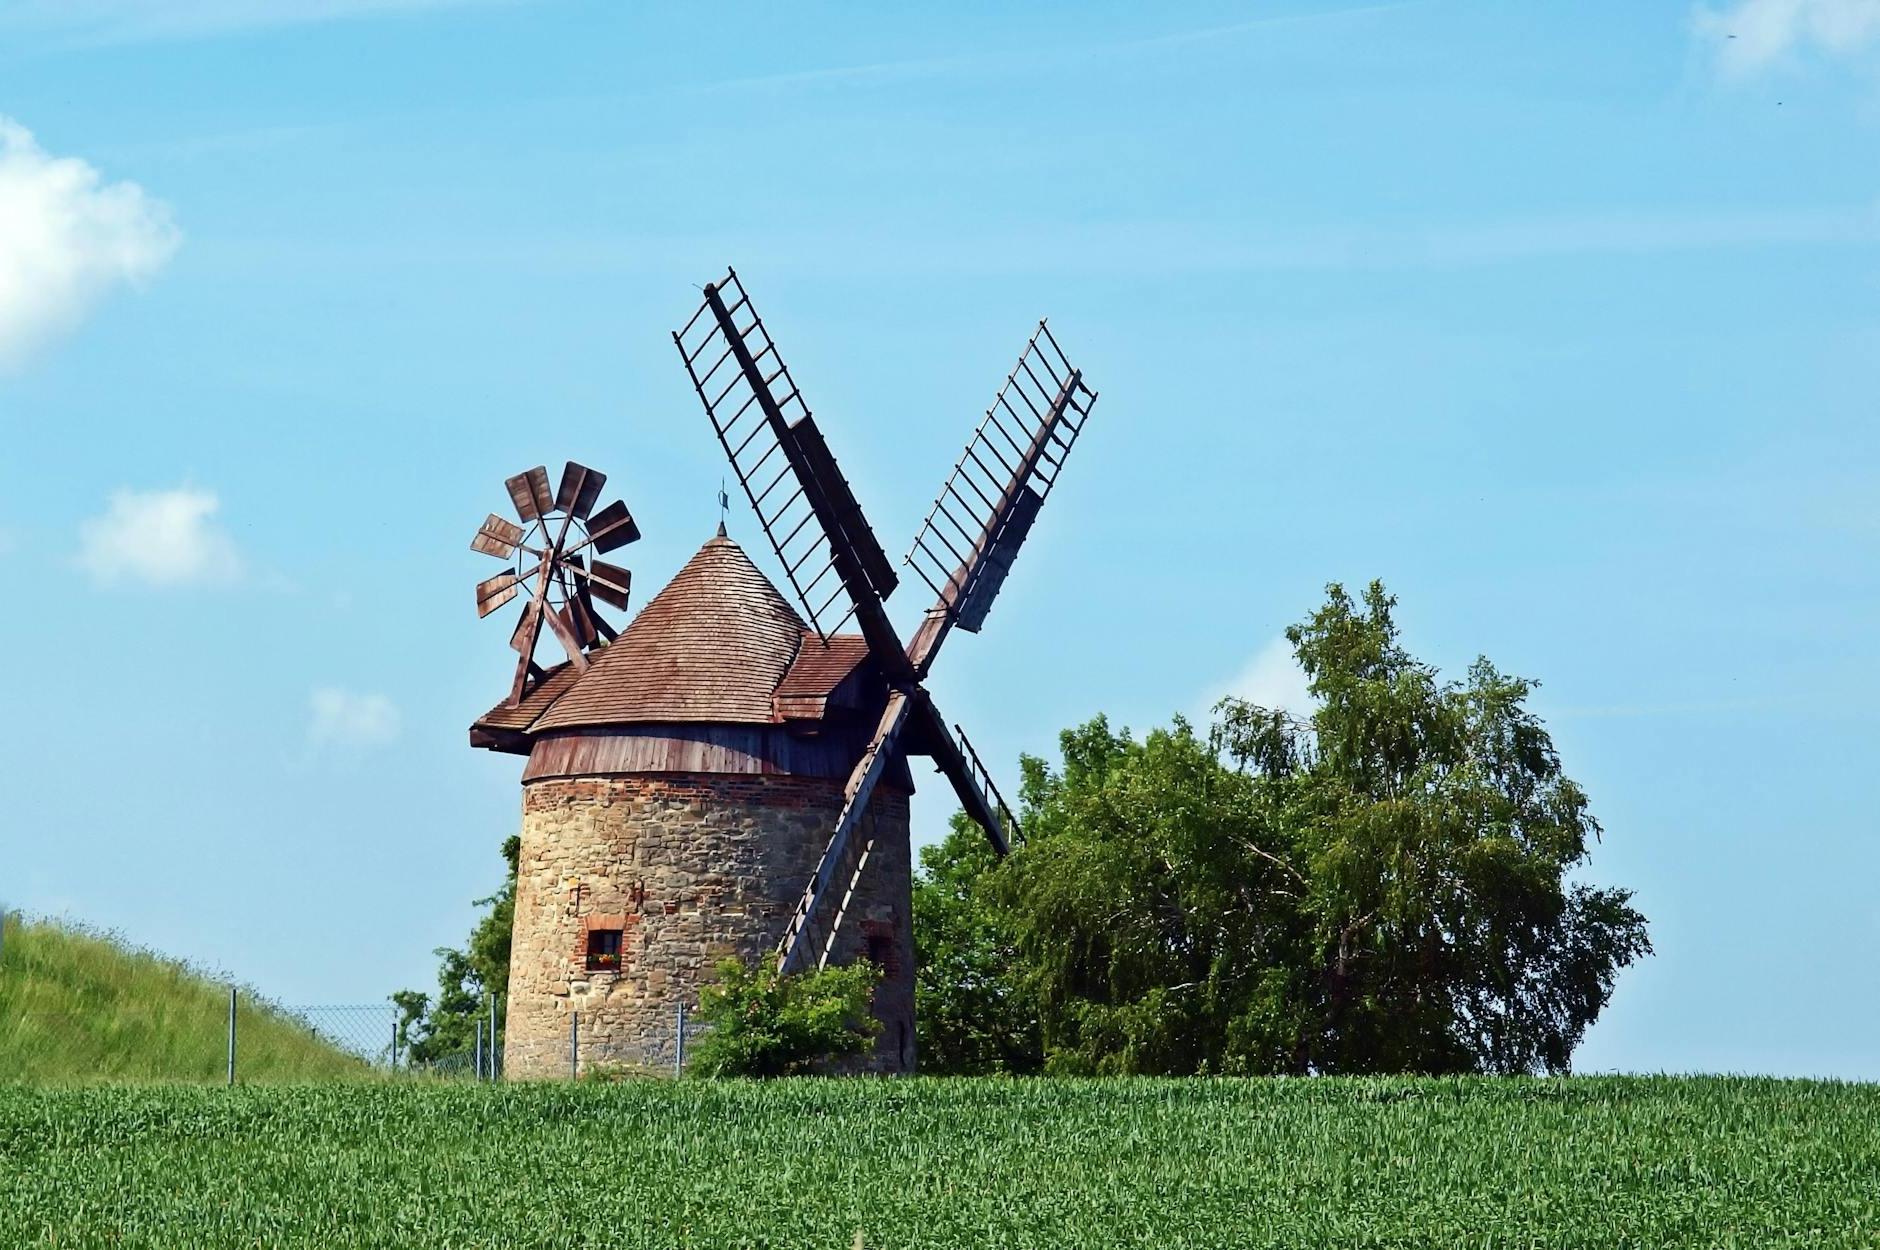 Brown and Gray Windmill Beside Green Tree Under Blue Cloudy Sky during Day Time